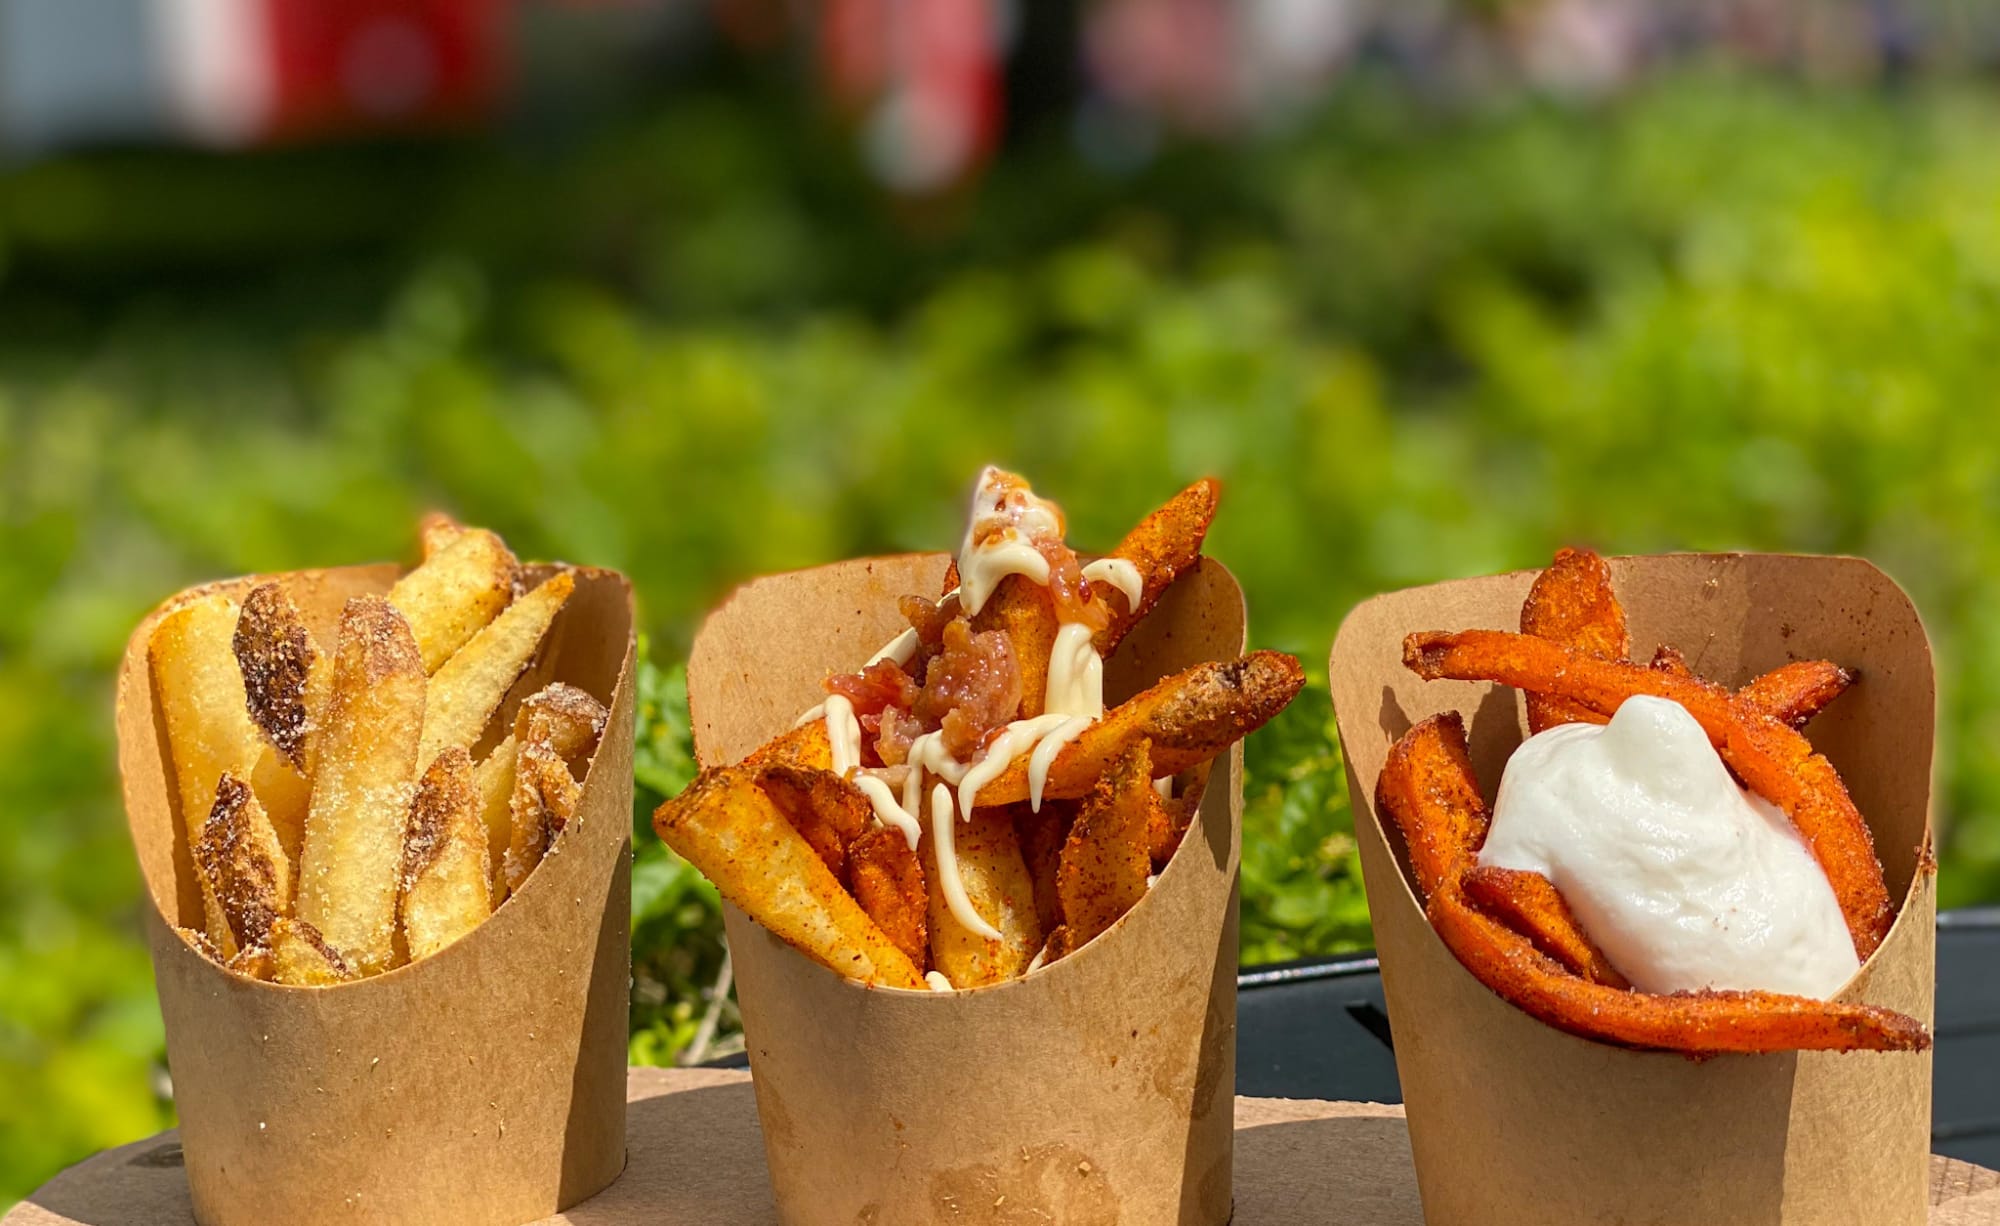 Best first bites at 2022 EPCOT Food and Wine Festival